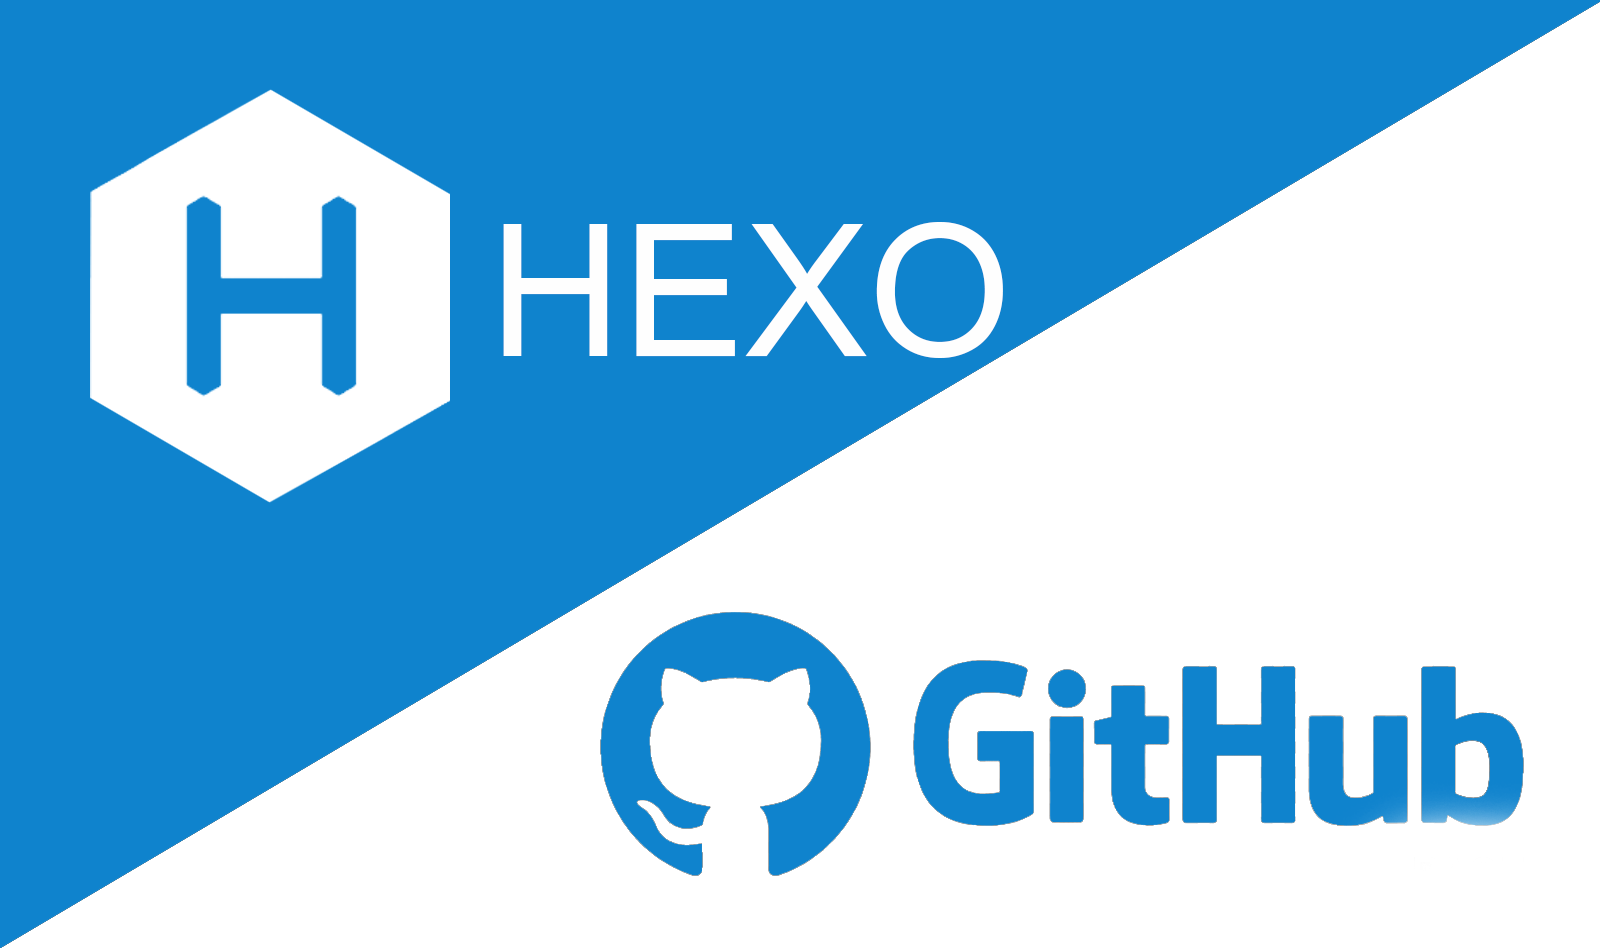 How To Use Hexo